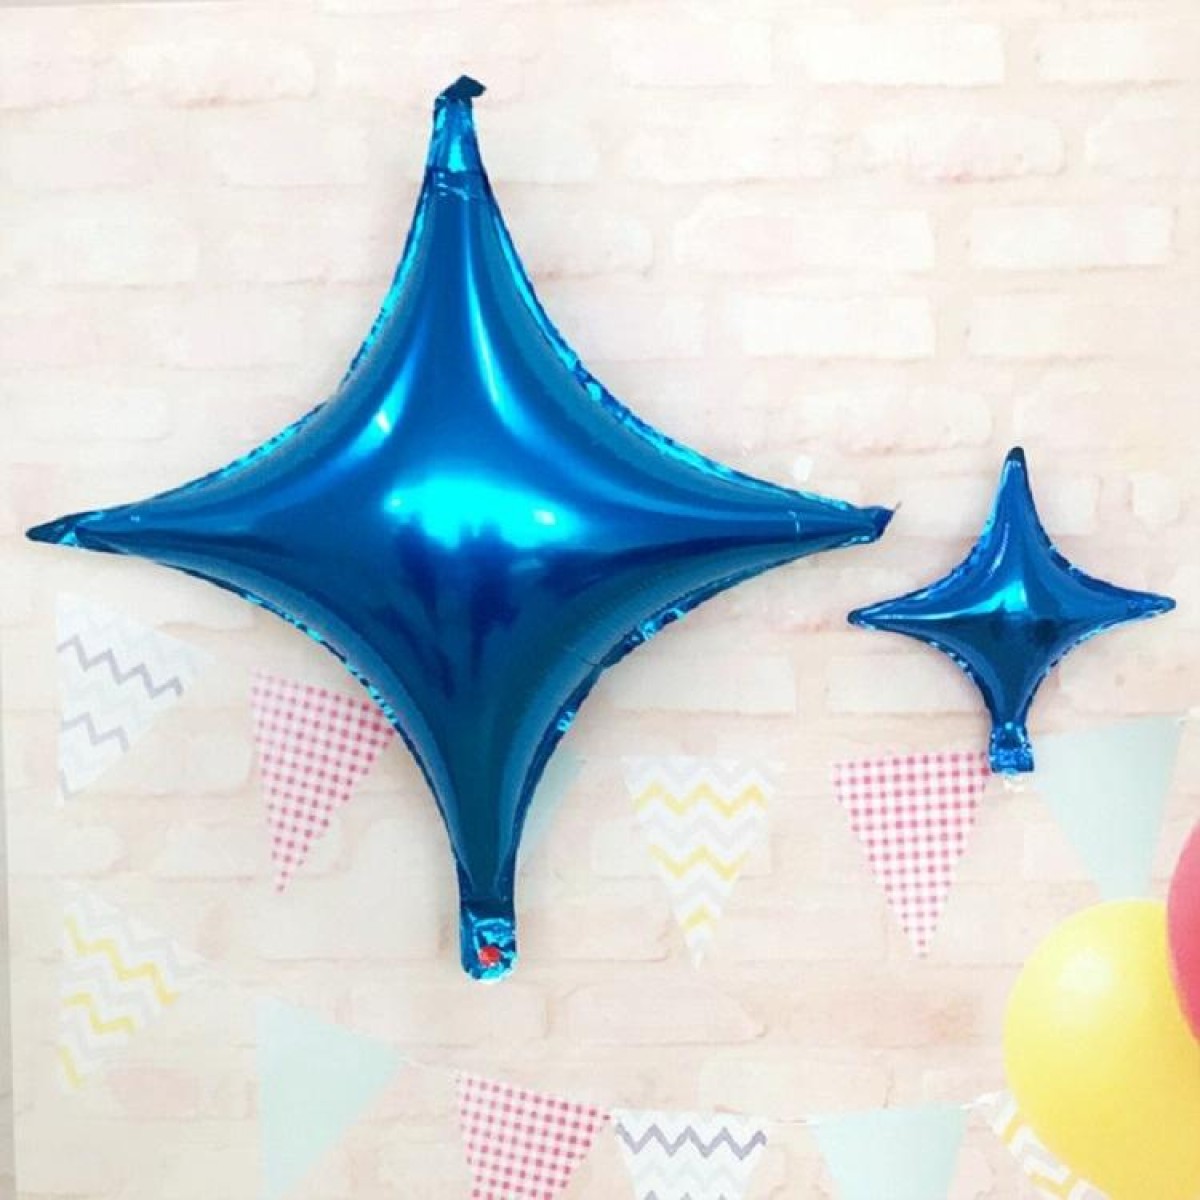 10 PCS Four-pointed Star Children Party Decoration Balloon Theme Bbirthday Balloon Package Accessories, Size:24 inches, Color:Blue